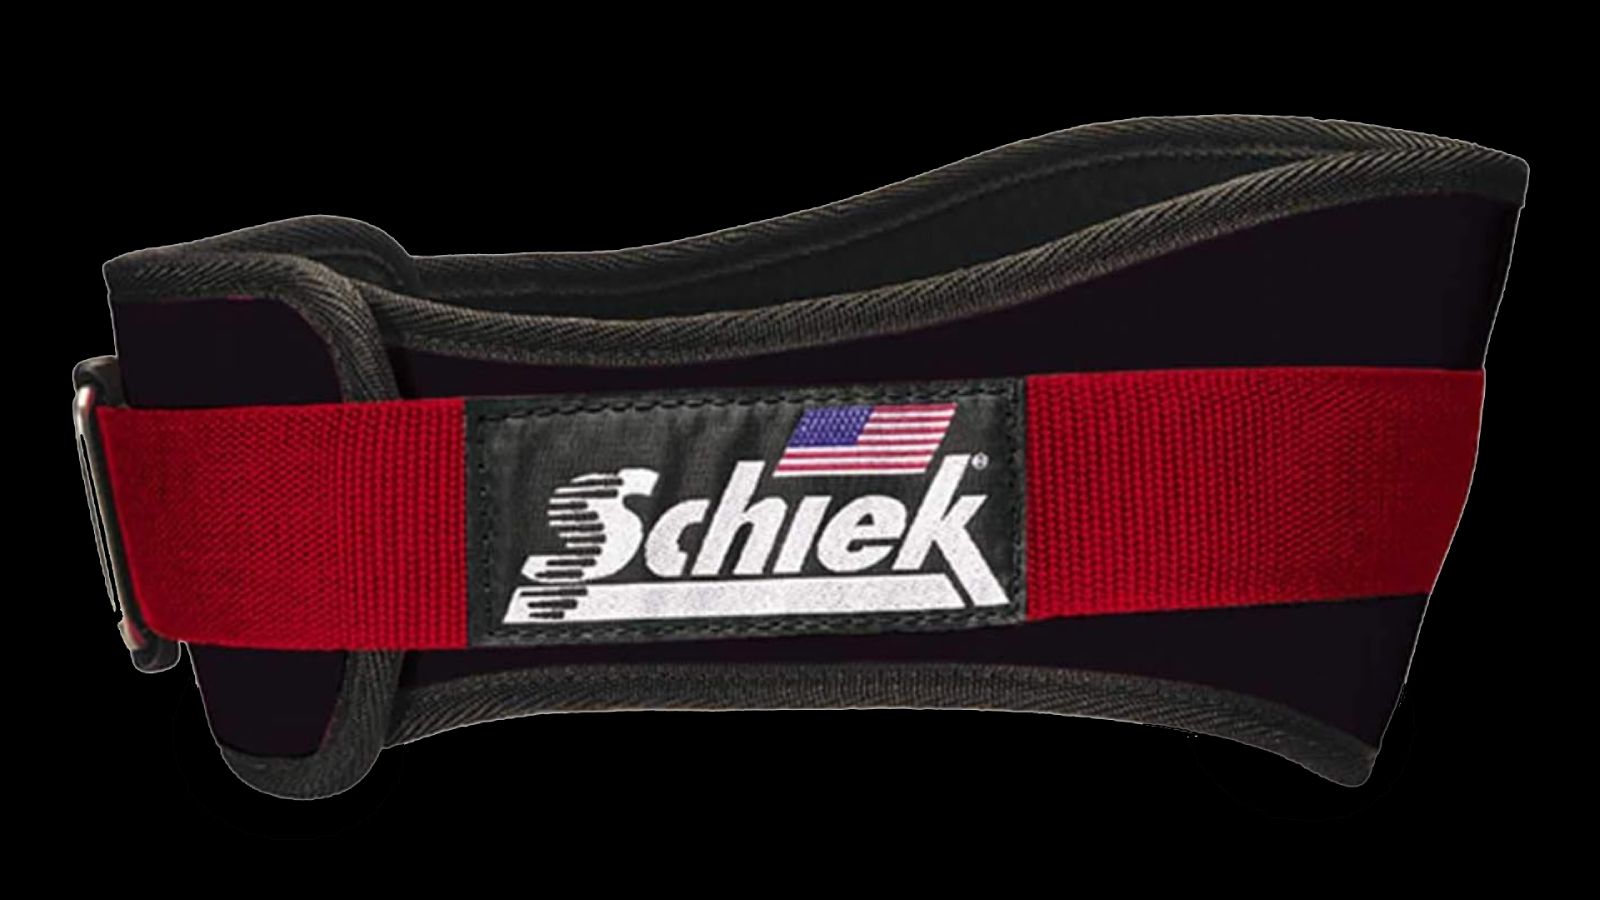 Schiek Sports Model 3004 product image of black and red fabric belt.